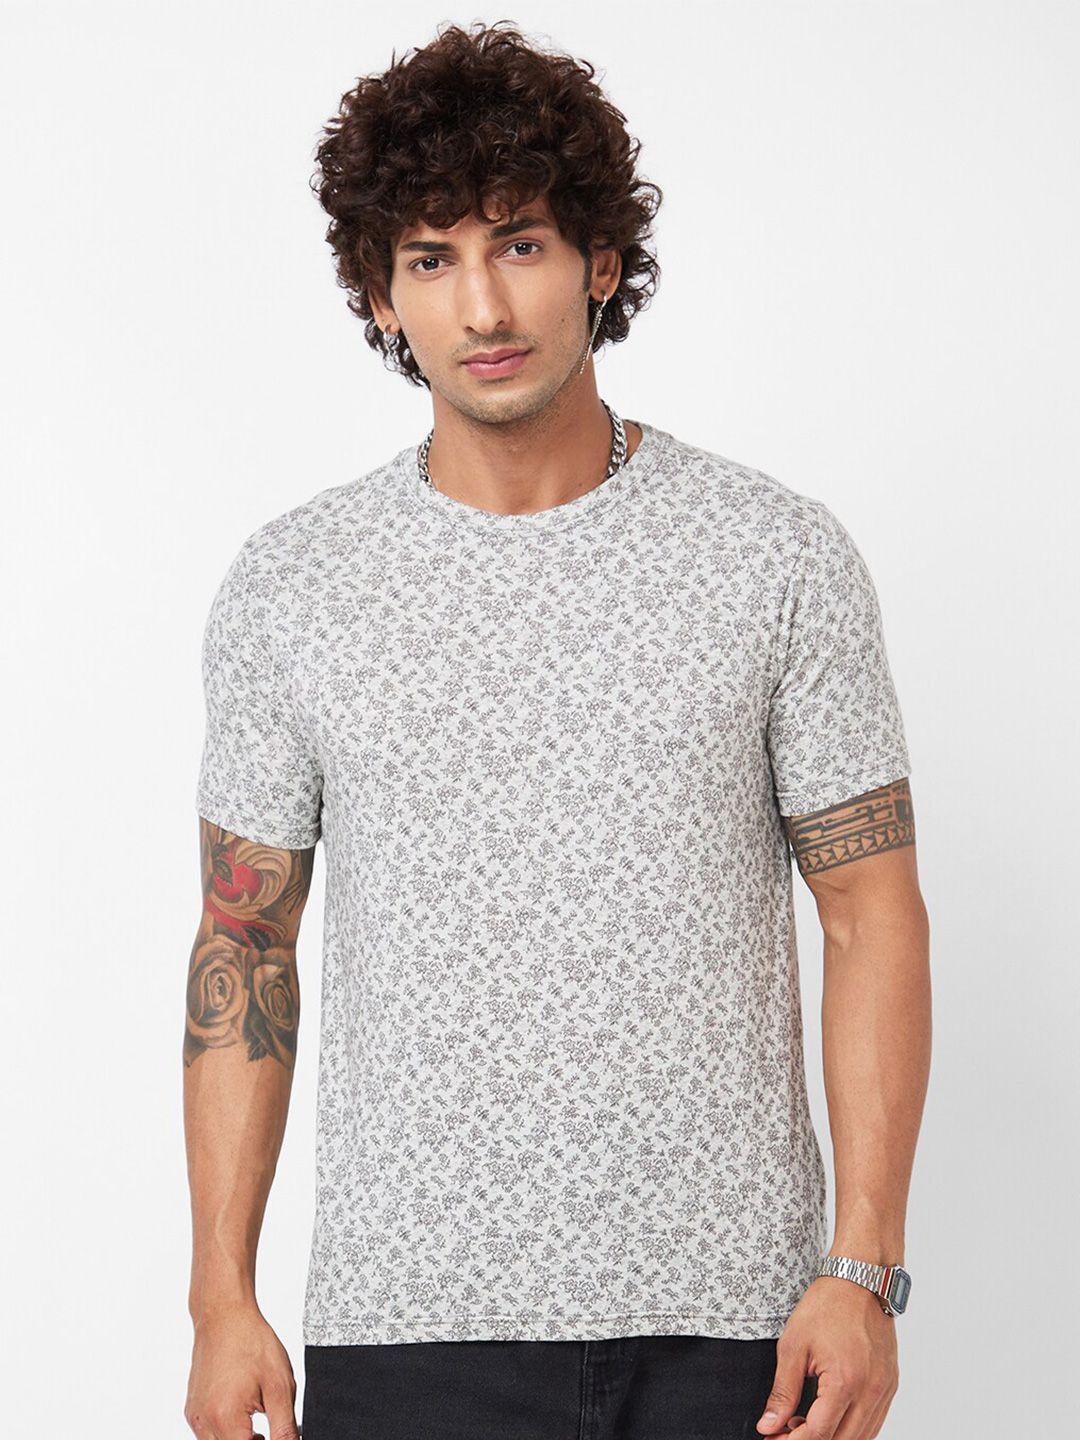 vastrado micro pattern floral printed round neck cotton casual t-shirt